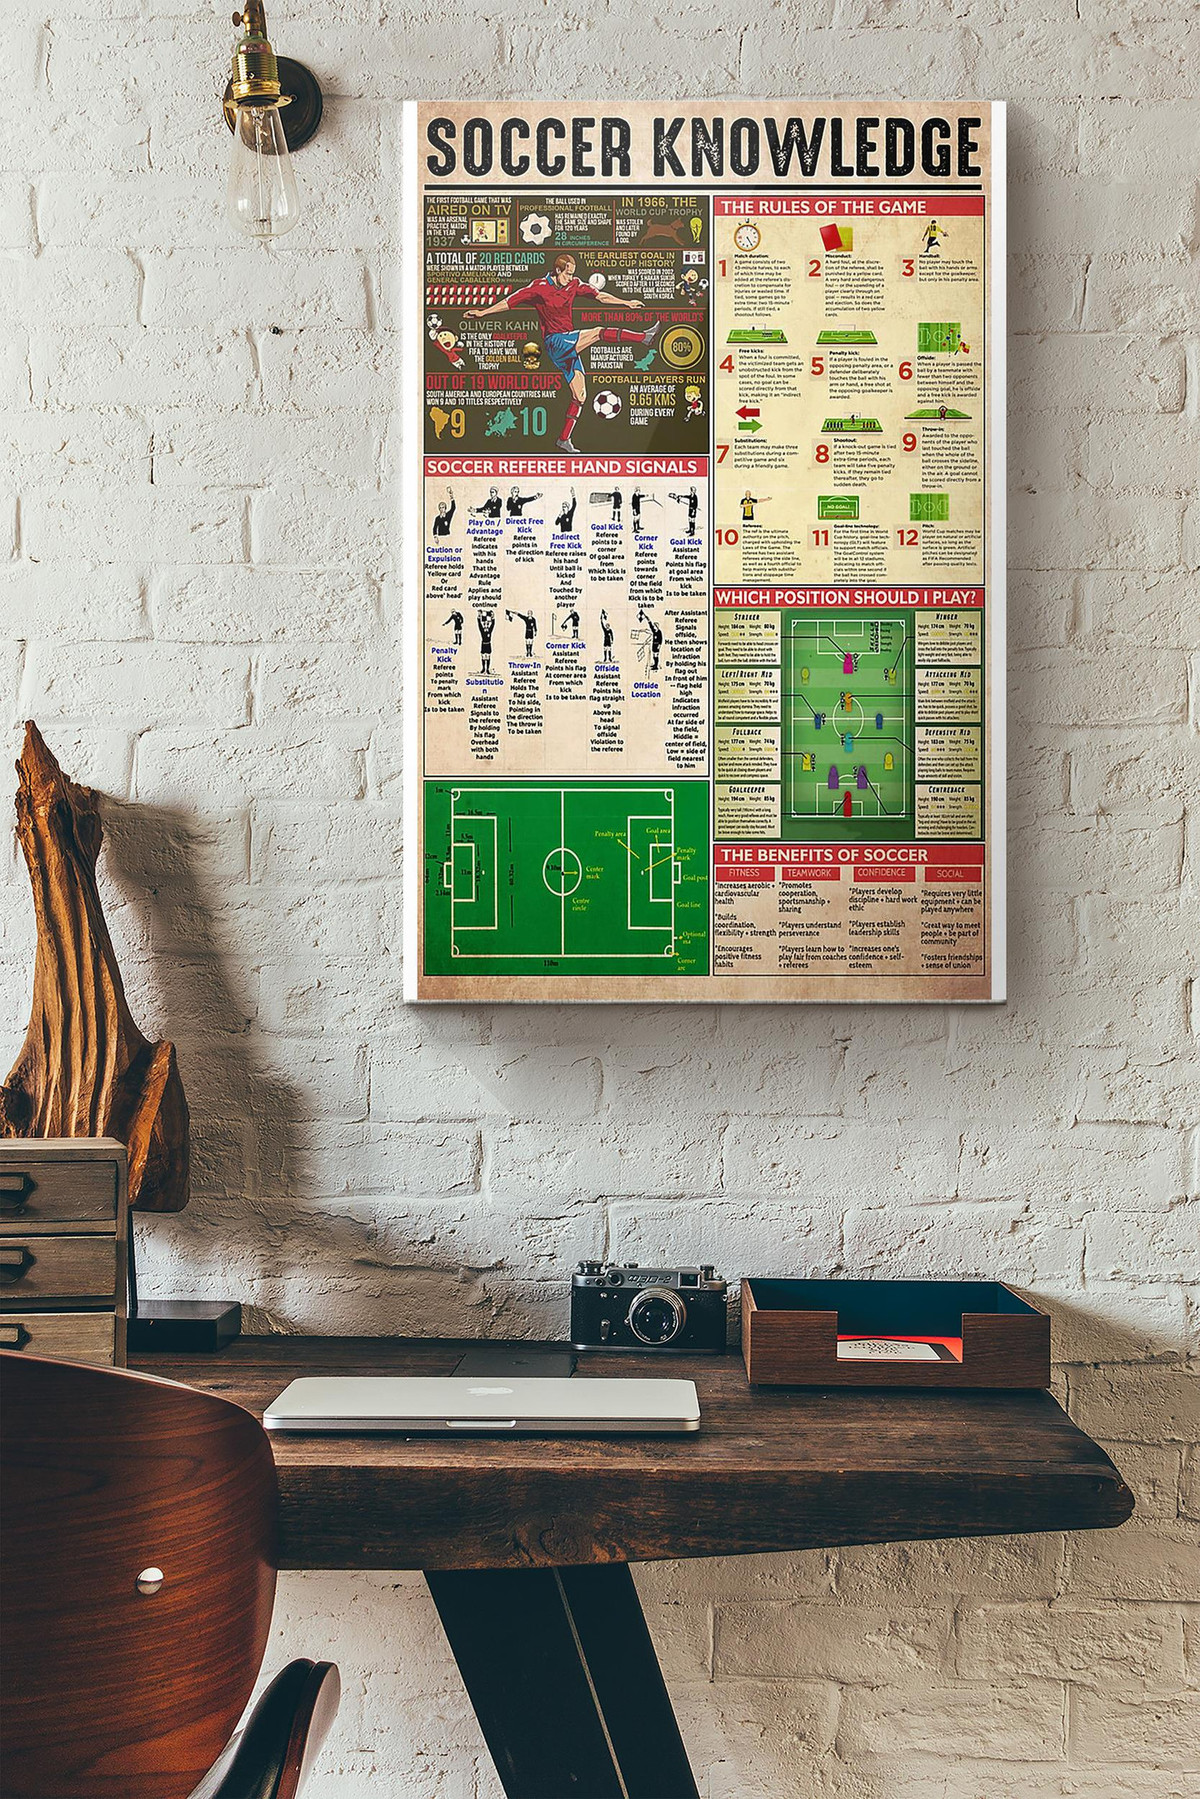 Soccer Knowledge Canvas Painting Ideas, Canvas Hanging Prints, Gift Idea Framed Prints, Canvas Paintings Wrapped Canvas 8x10